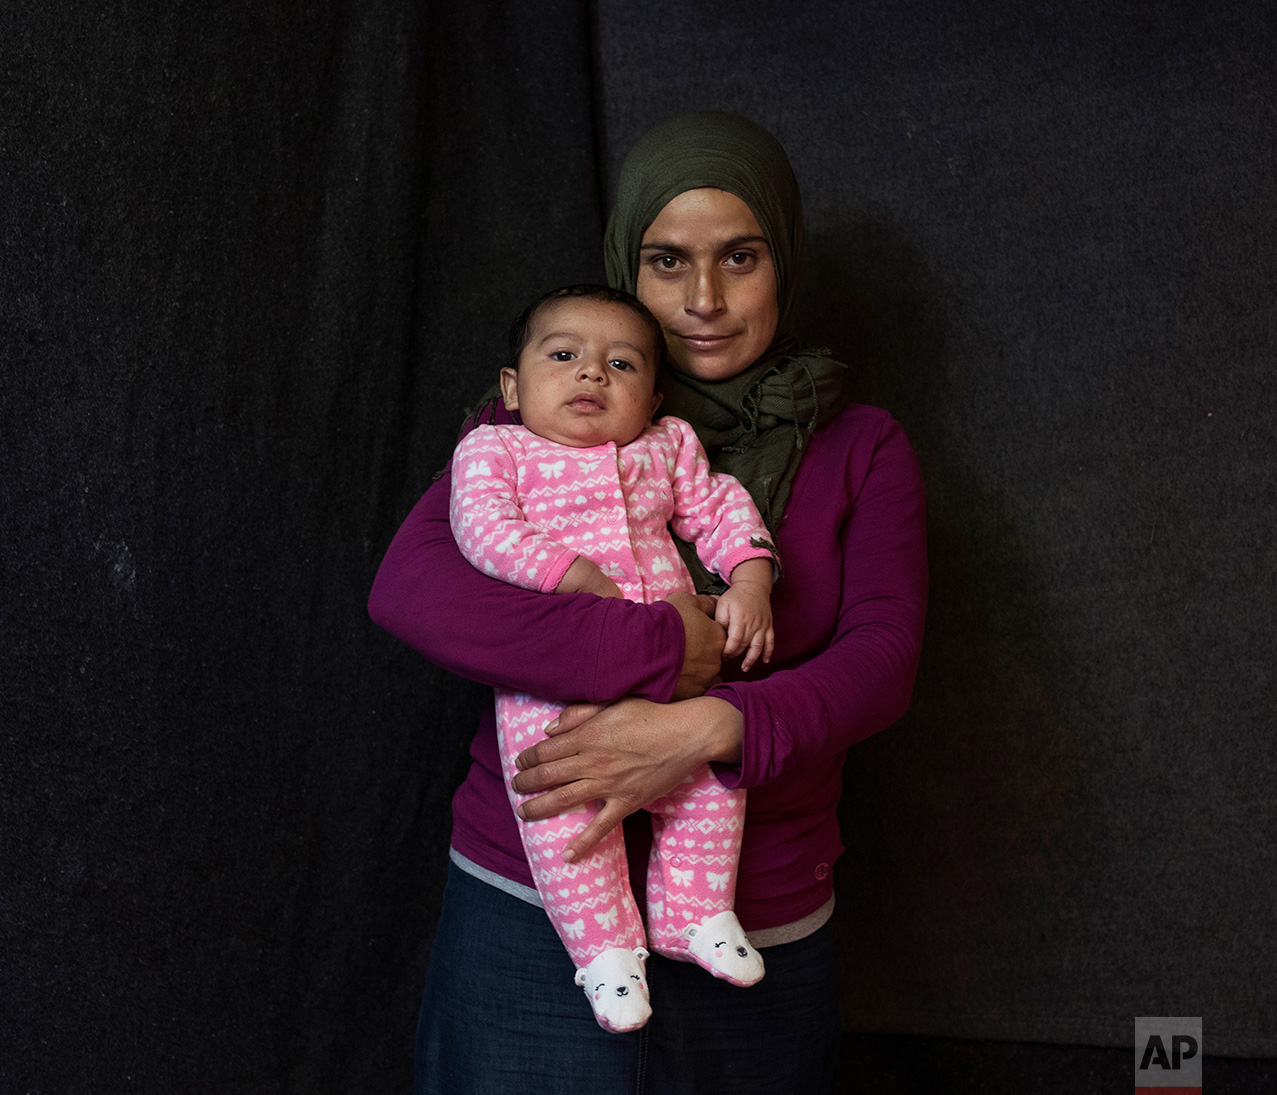  In this Wednesday Oct. 19, 2016, 25-year-old Arna Al Mousa, a Syrian mother from the city of Idlib, poses with her baby boy Yousef Al Mousa in a tent made of blankets given by the UNCHR at the Ritsona refugee camp in Greece. Anna is one of the hundr